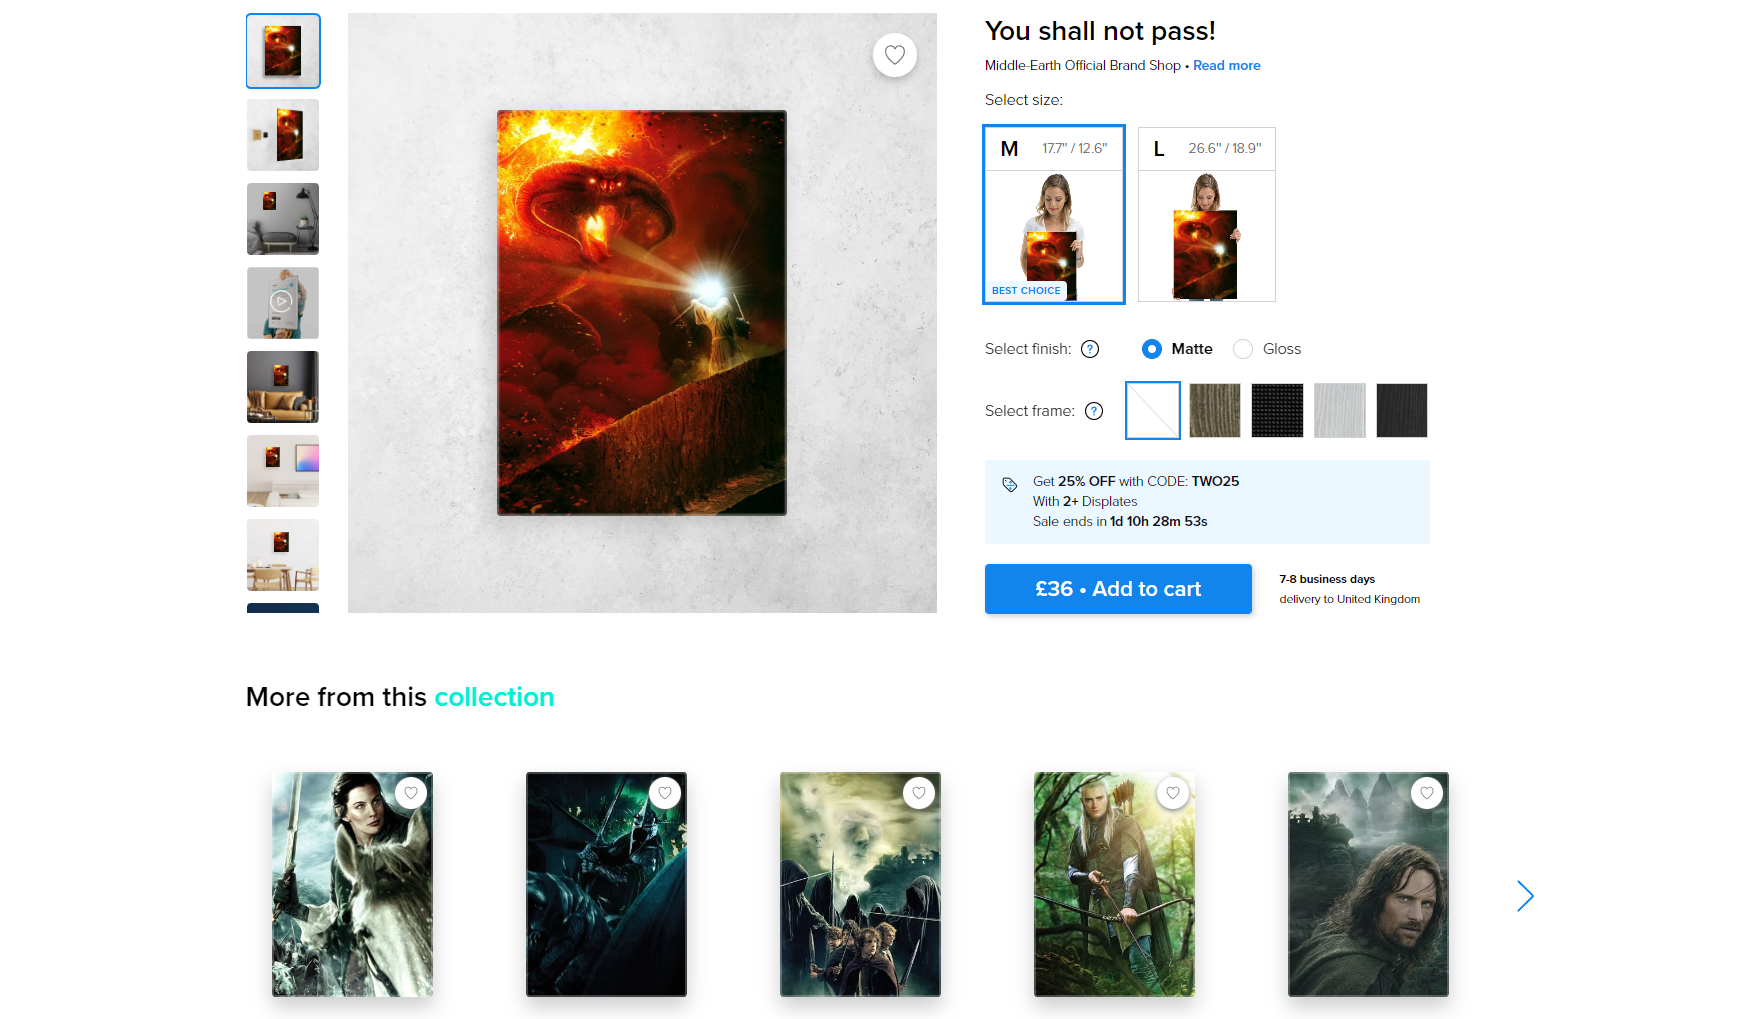 Displate website showing the latest Middle Earth themed options.